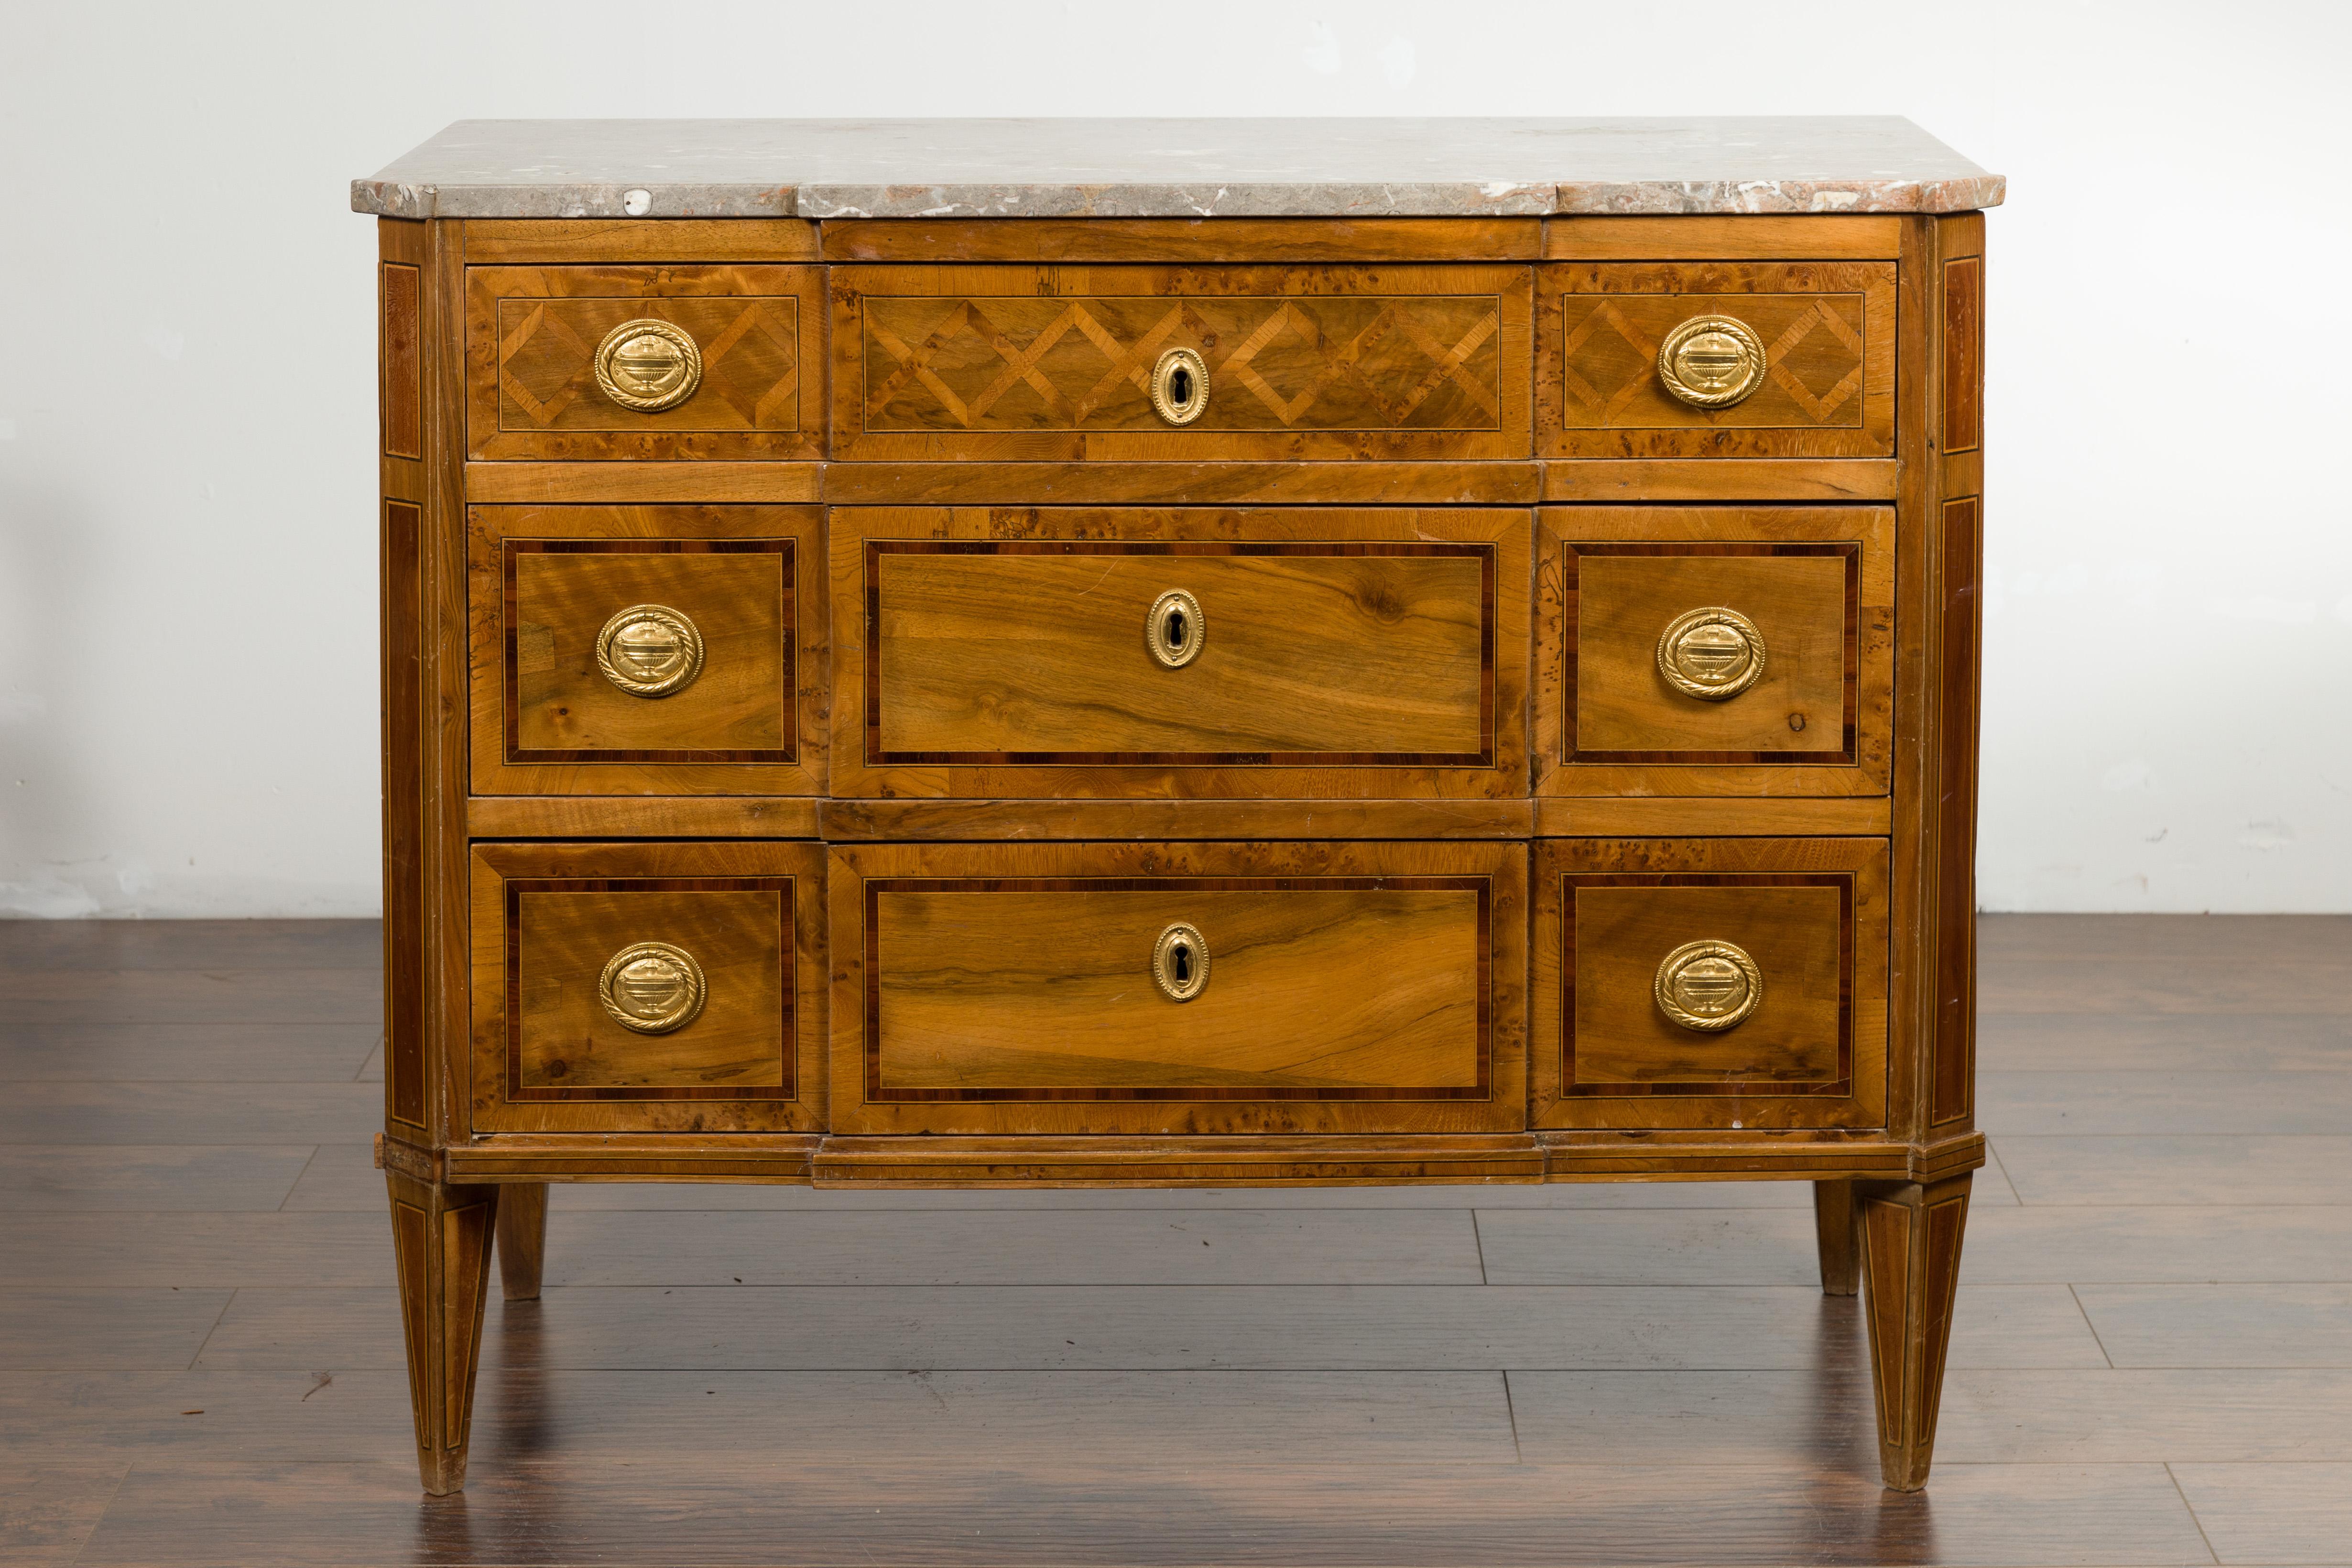 European Italian 1820s Neoclassical Walnut Commode with Marble Top and Marquetry Decor